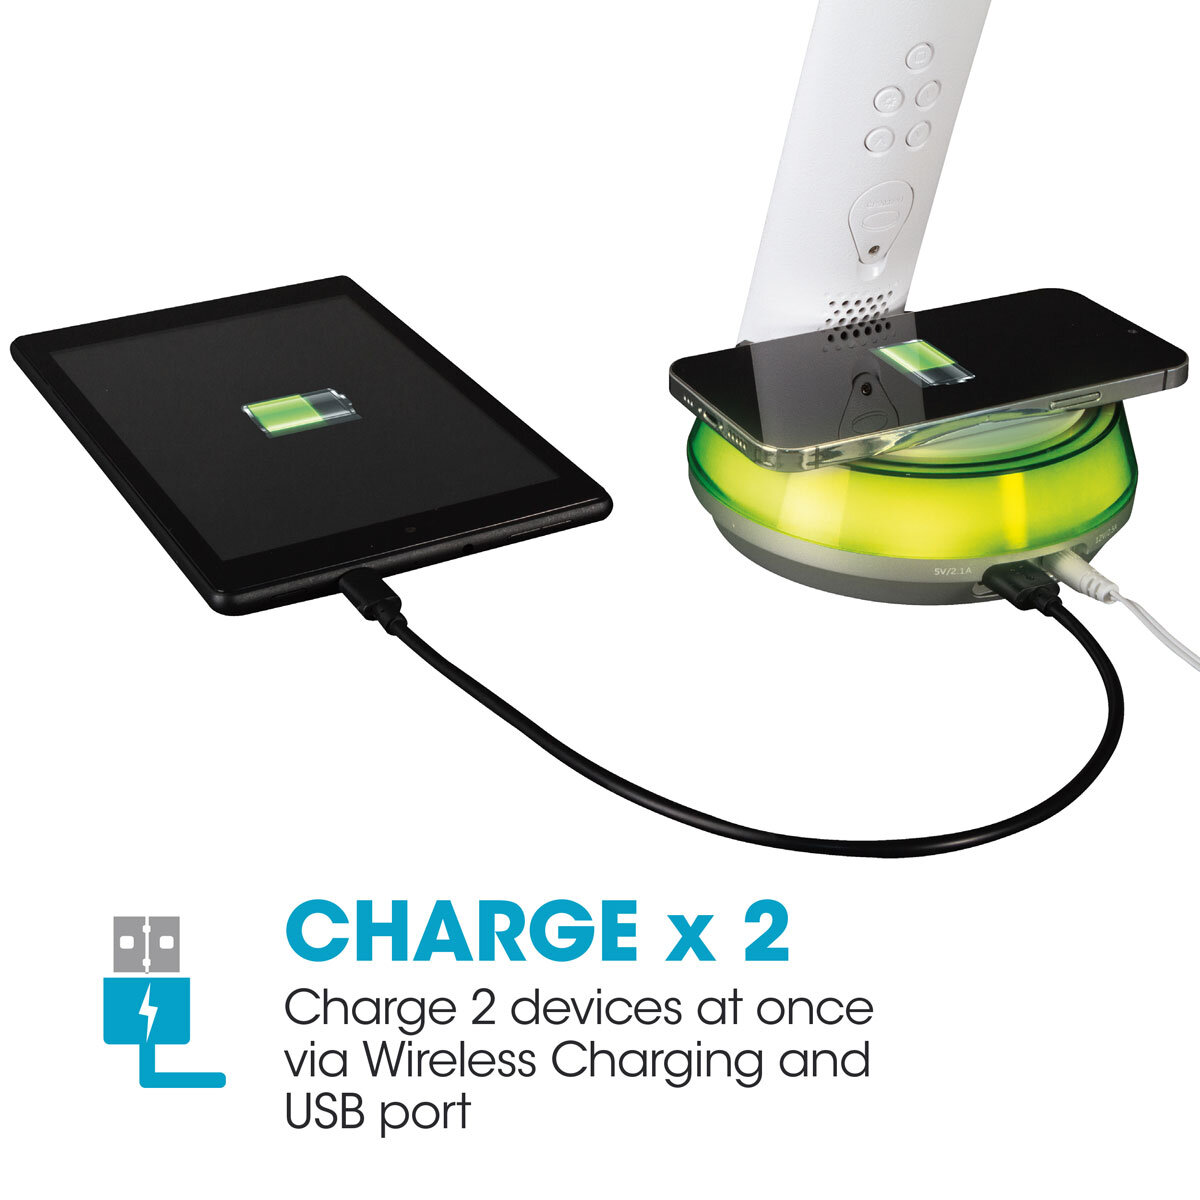 Buy Wireless charging LED Desk Lamp Base White Feature6 Image at Costco.co.uk